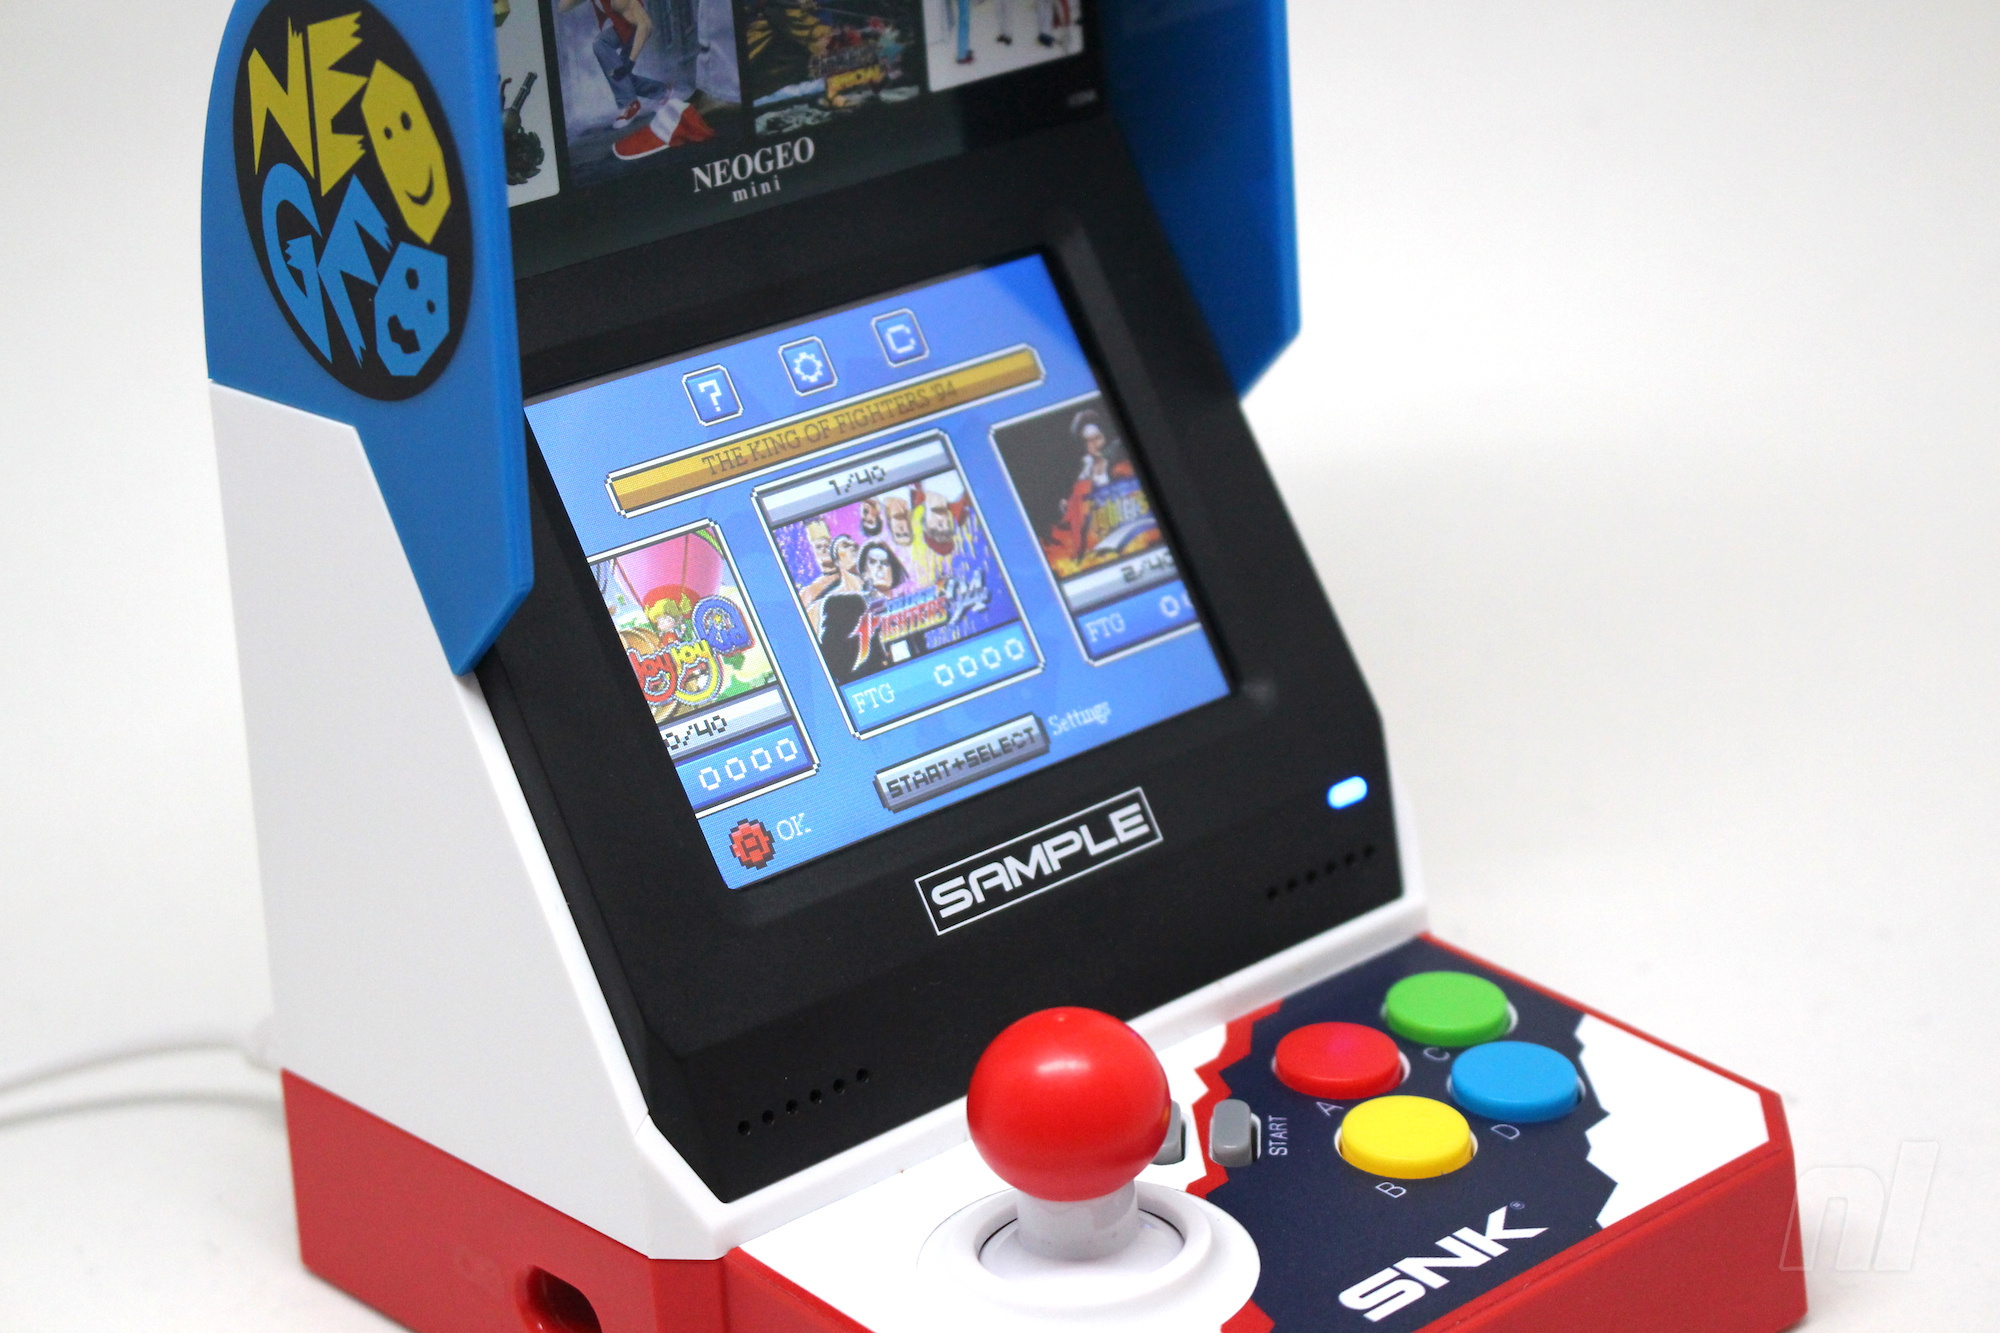 Hardware Review: Does The SNK Neo Geo Mini Outclass Nintendo's Classic